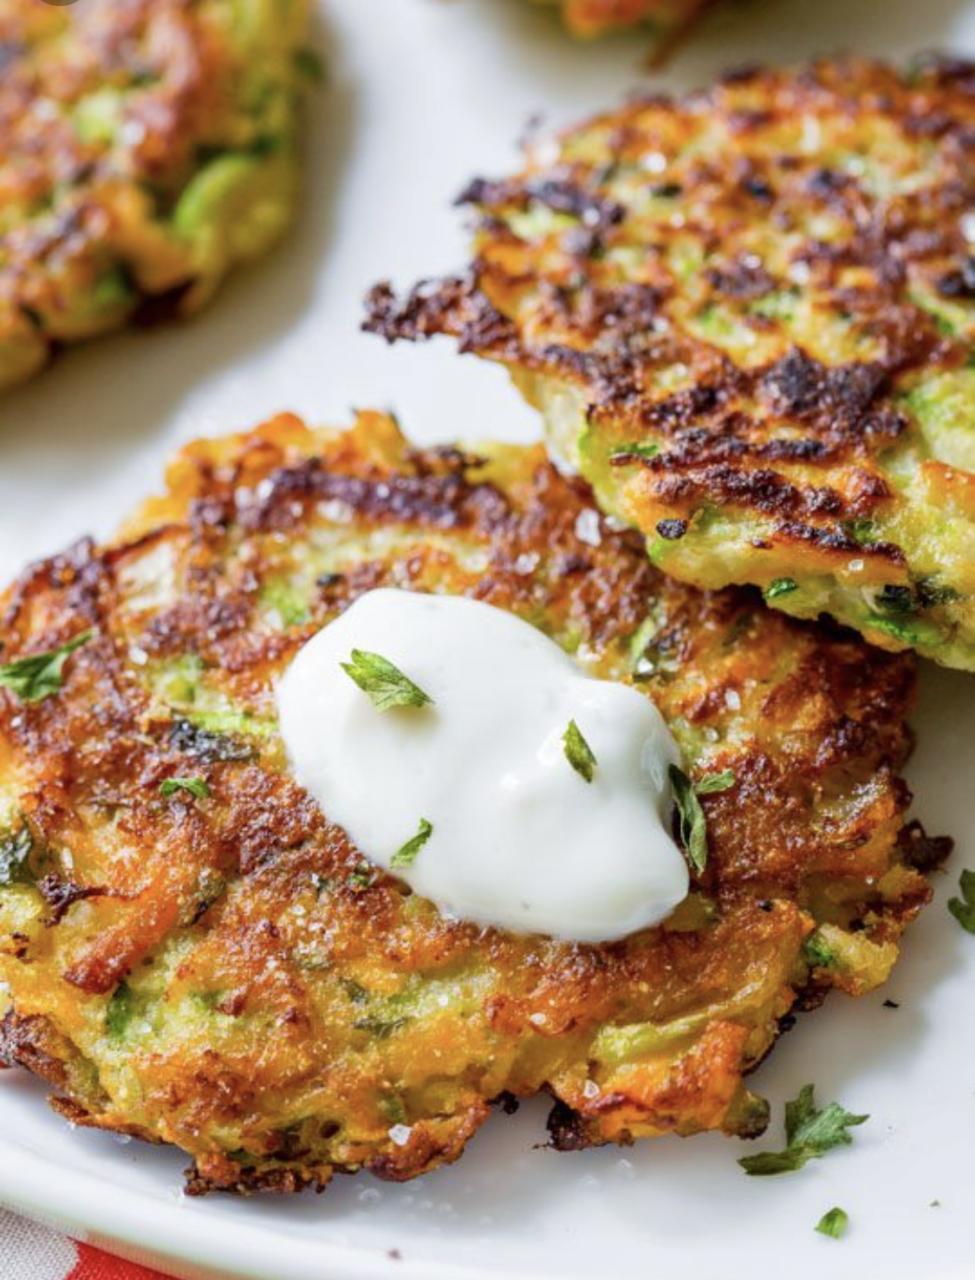 How to make Zucchini Patties with Dill Dip